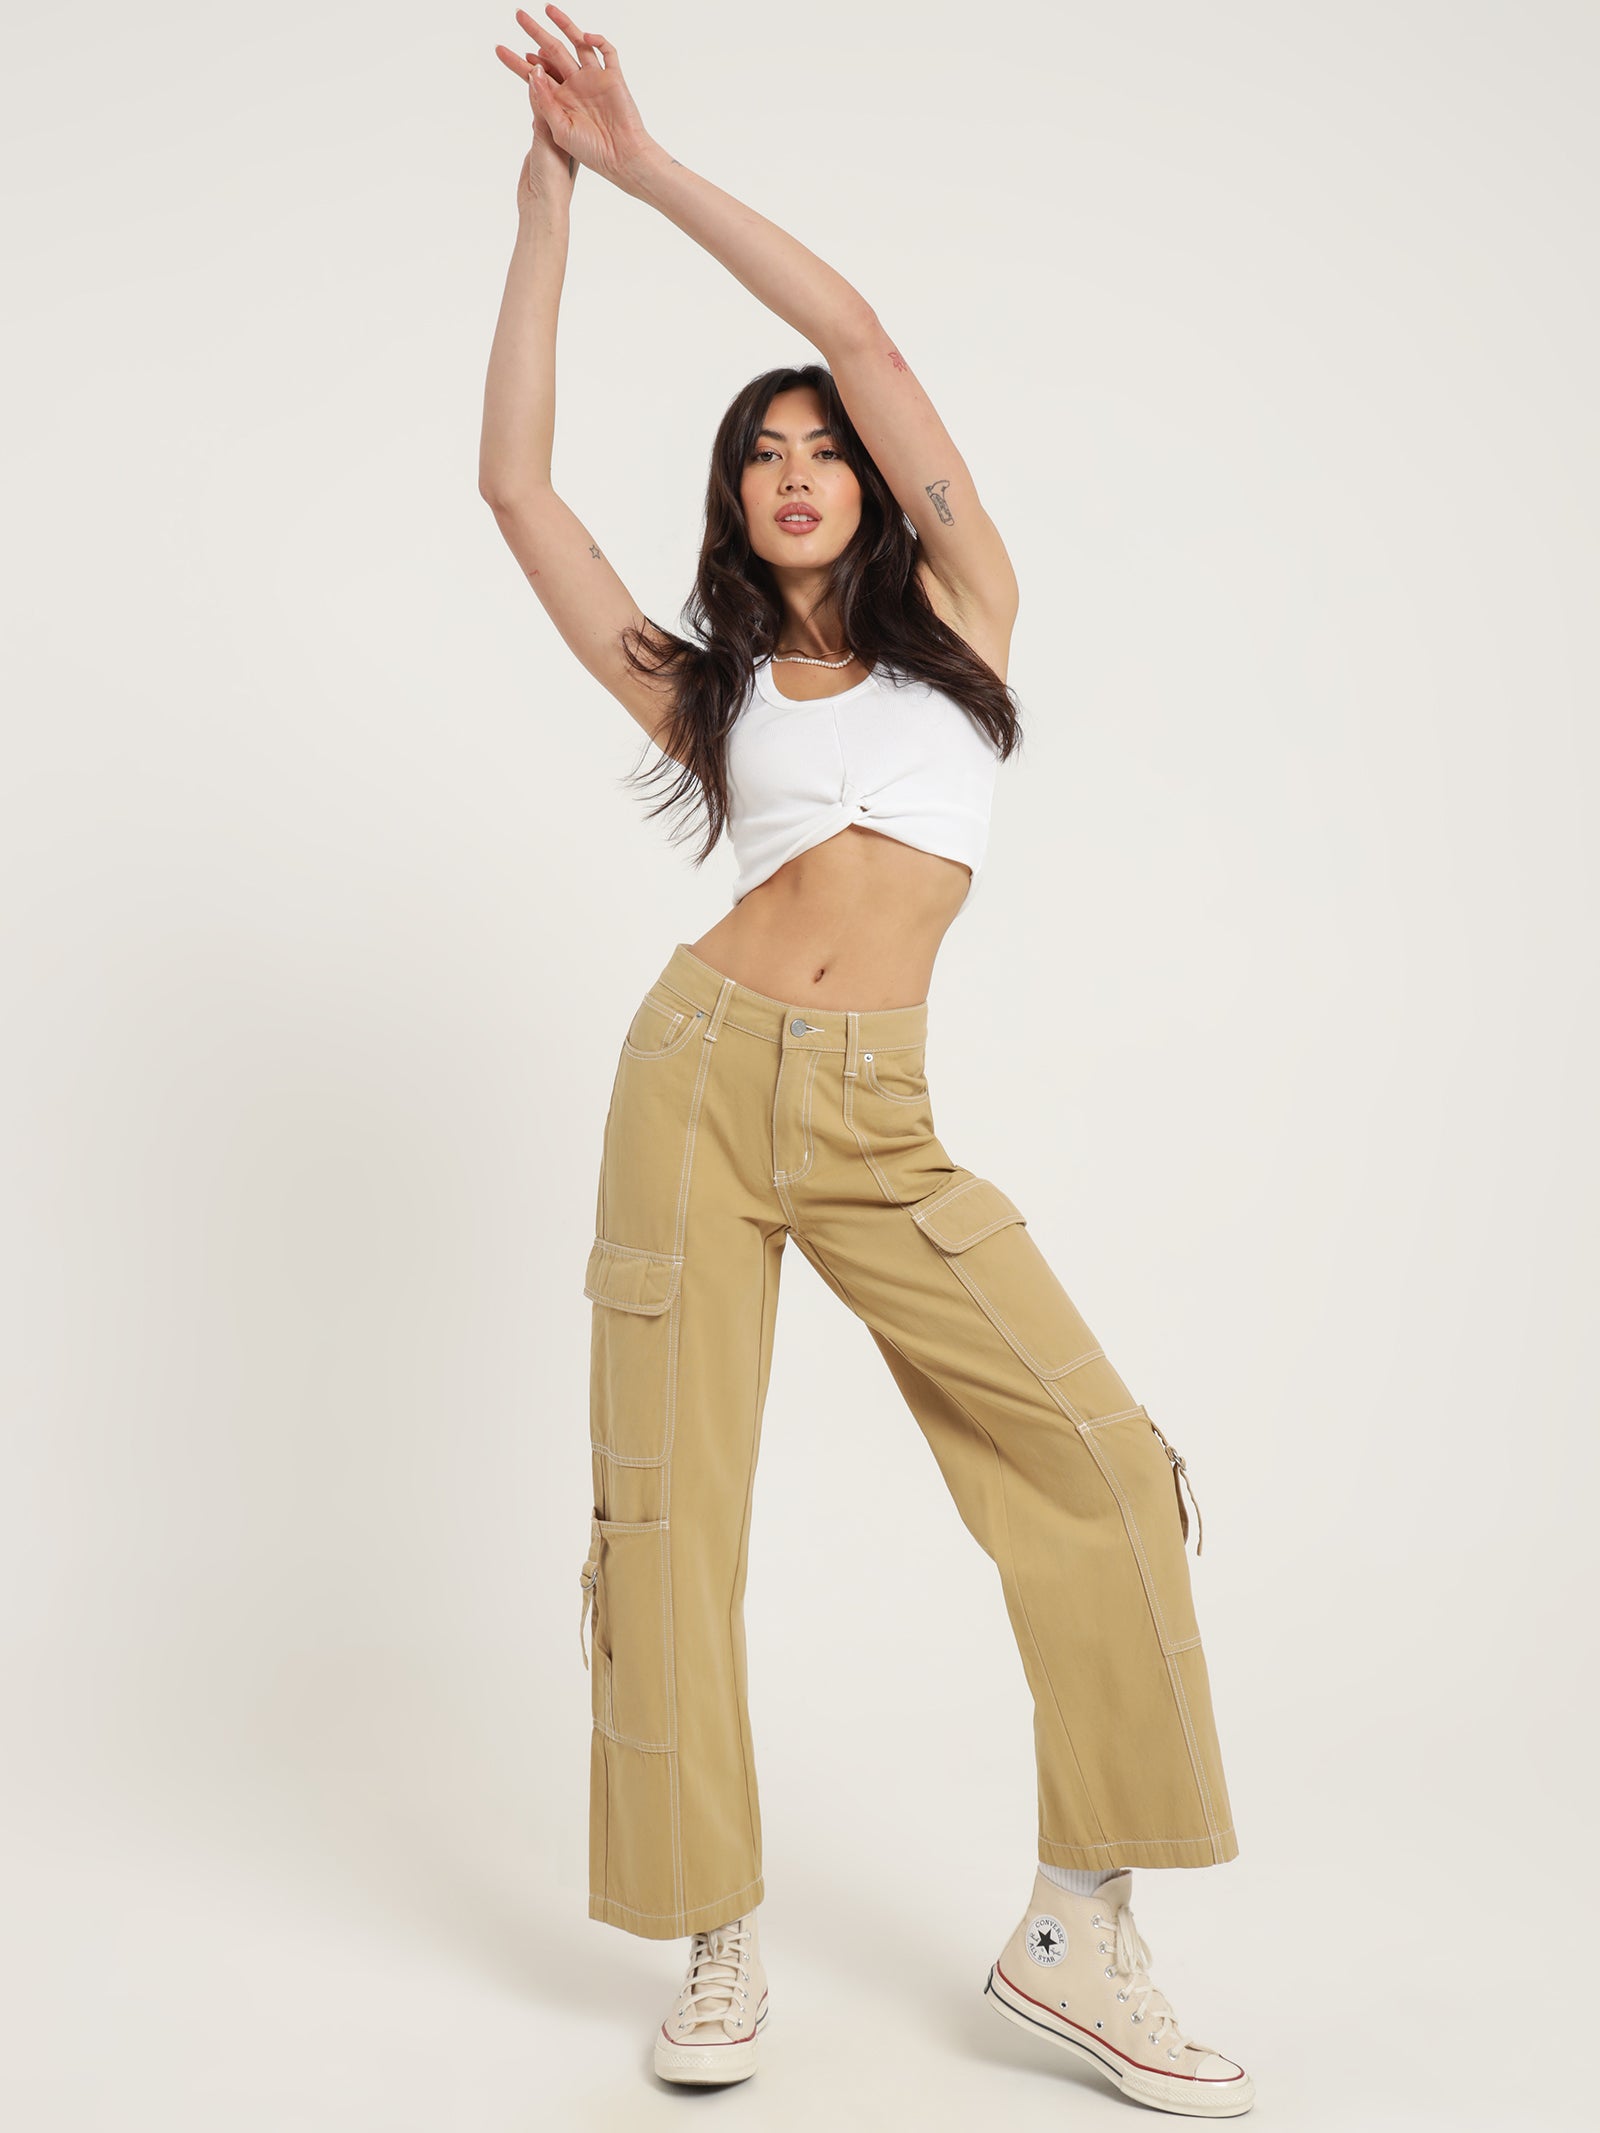 Hailey Bieber Wears Low-Rise Cargo Pants and a Cropped Tee | POPSUGAR  Fashion